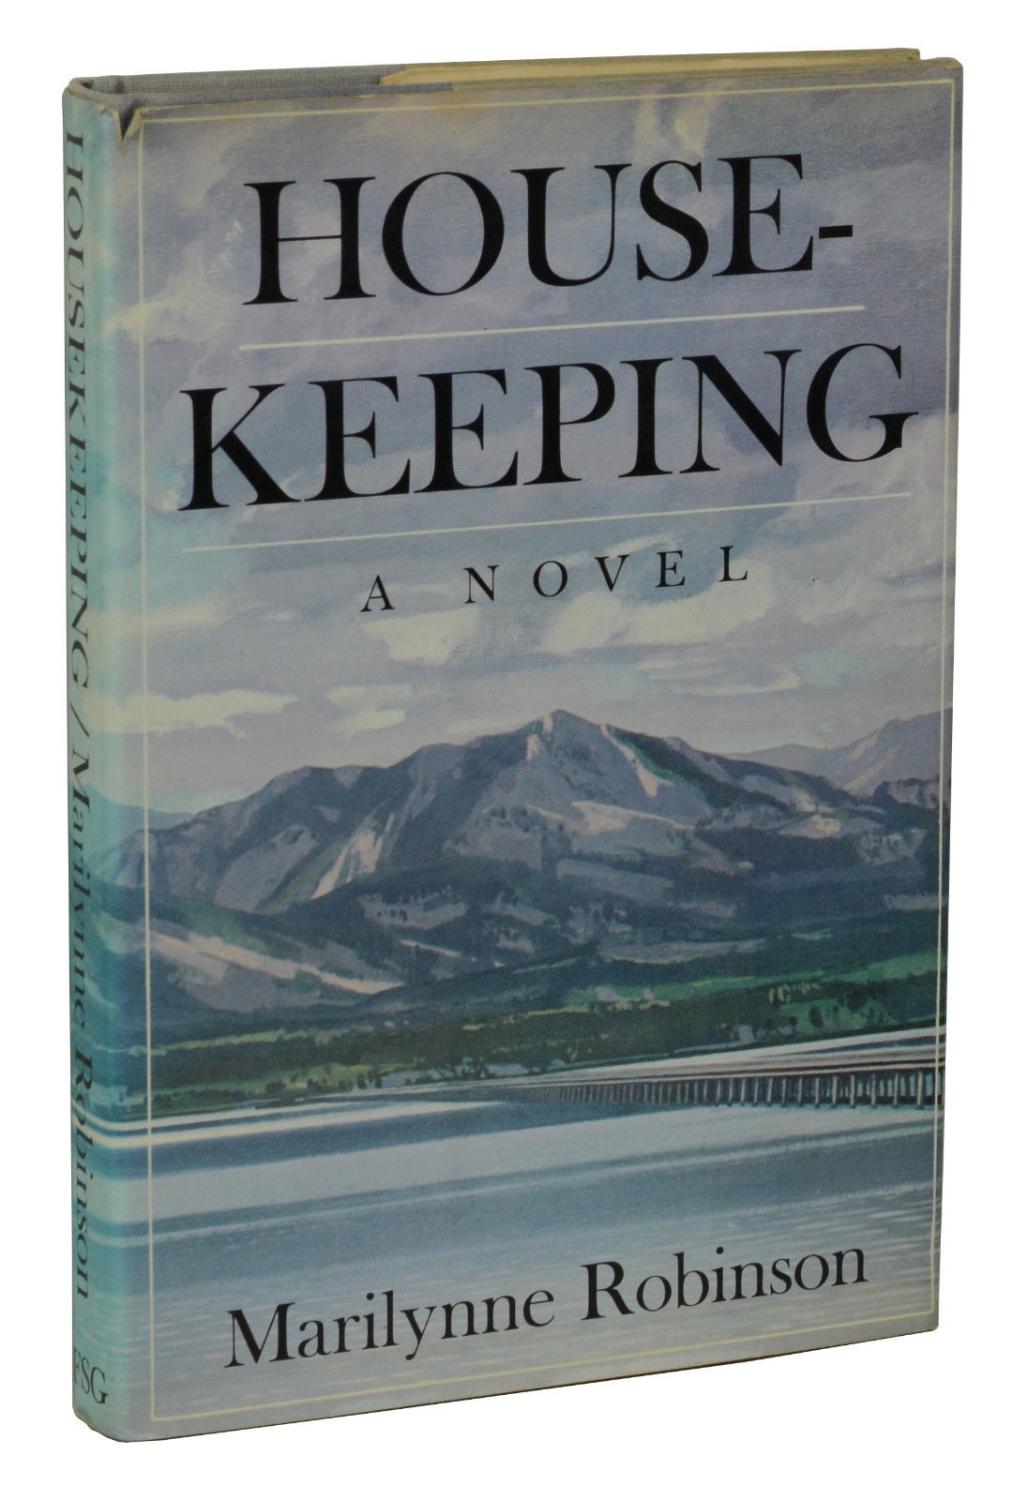 book review housekeeping marilynne robinson